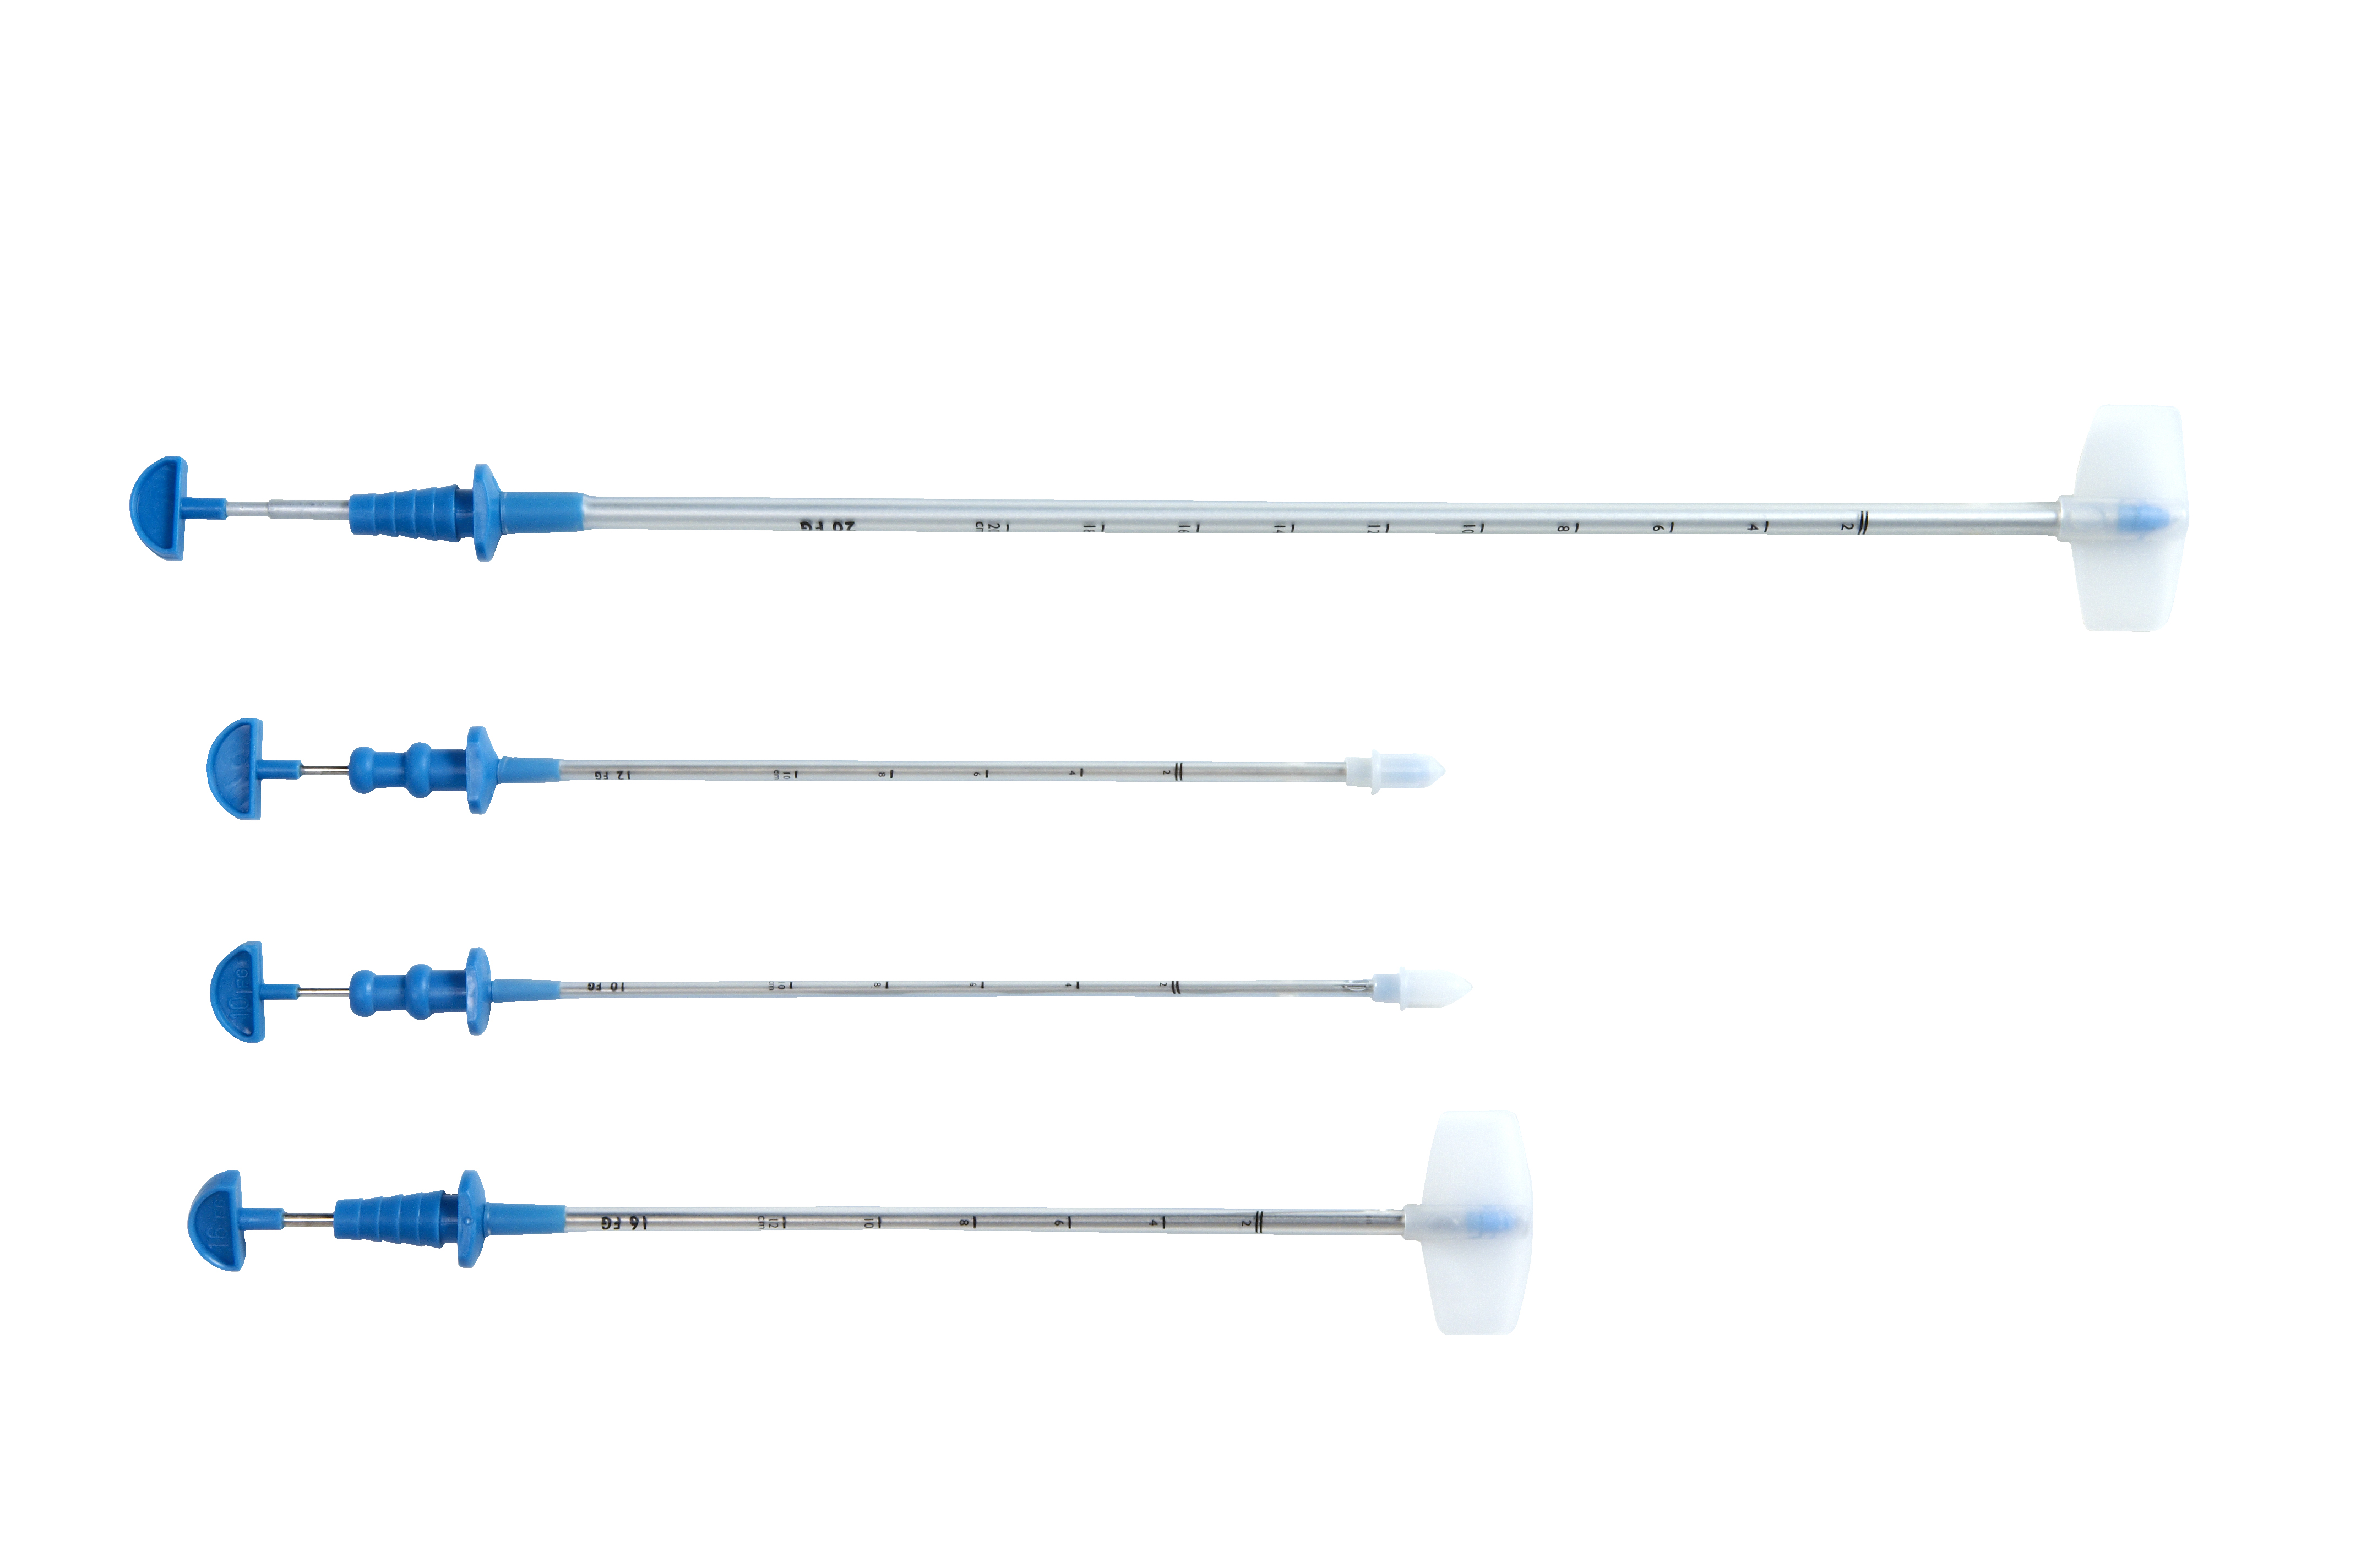 KRUUSE thoracic catheter with trocar, 16 FG, sterile